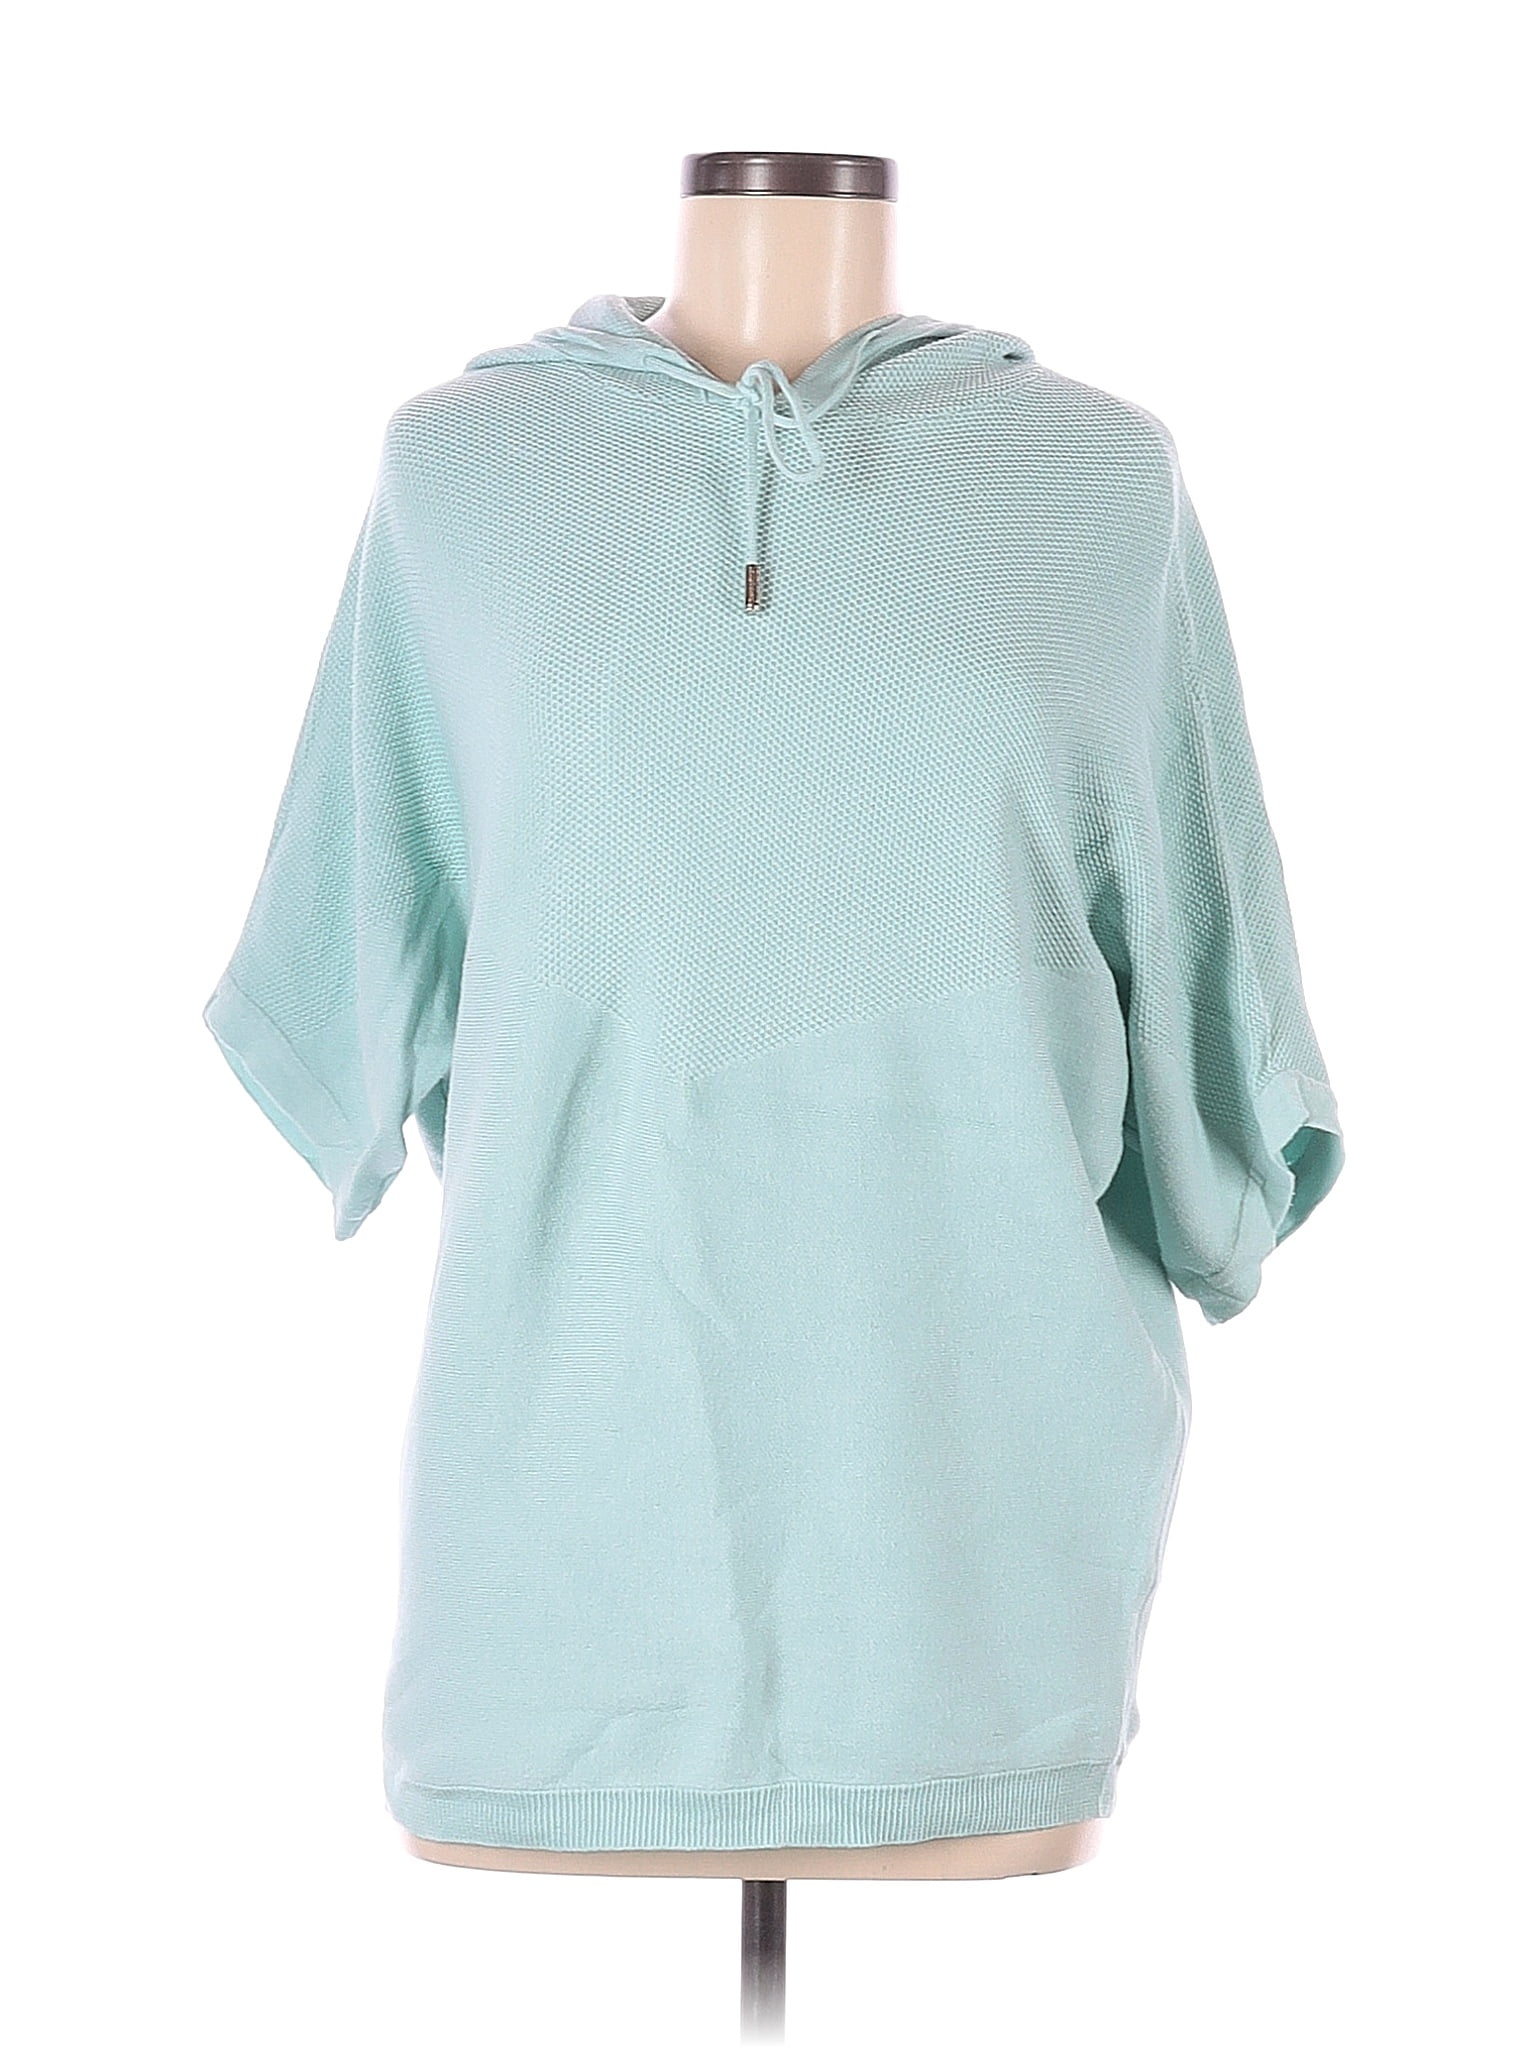 Rhonda Shear Solid Blue Teal Pullover Hoodie Size M - 52% off